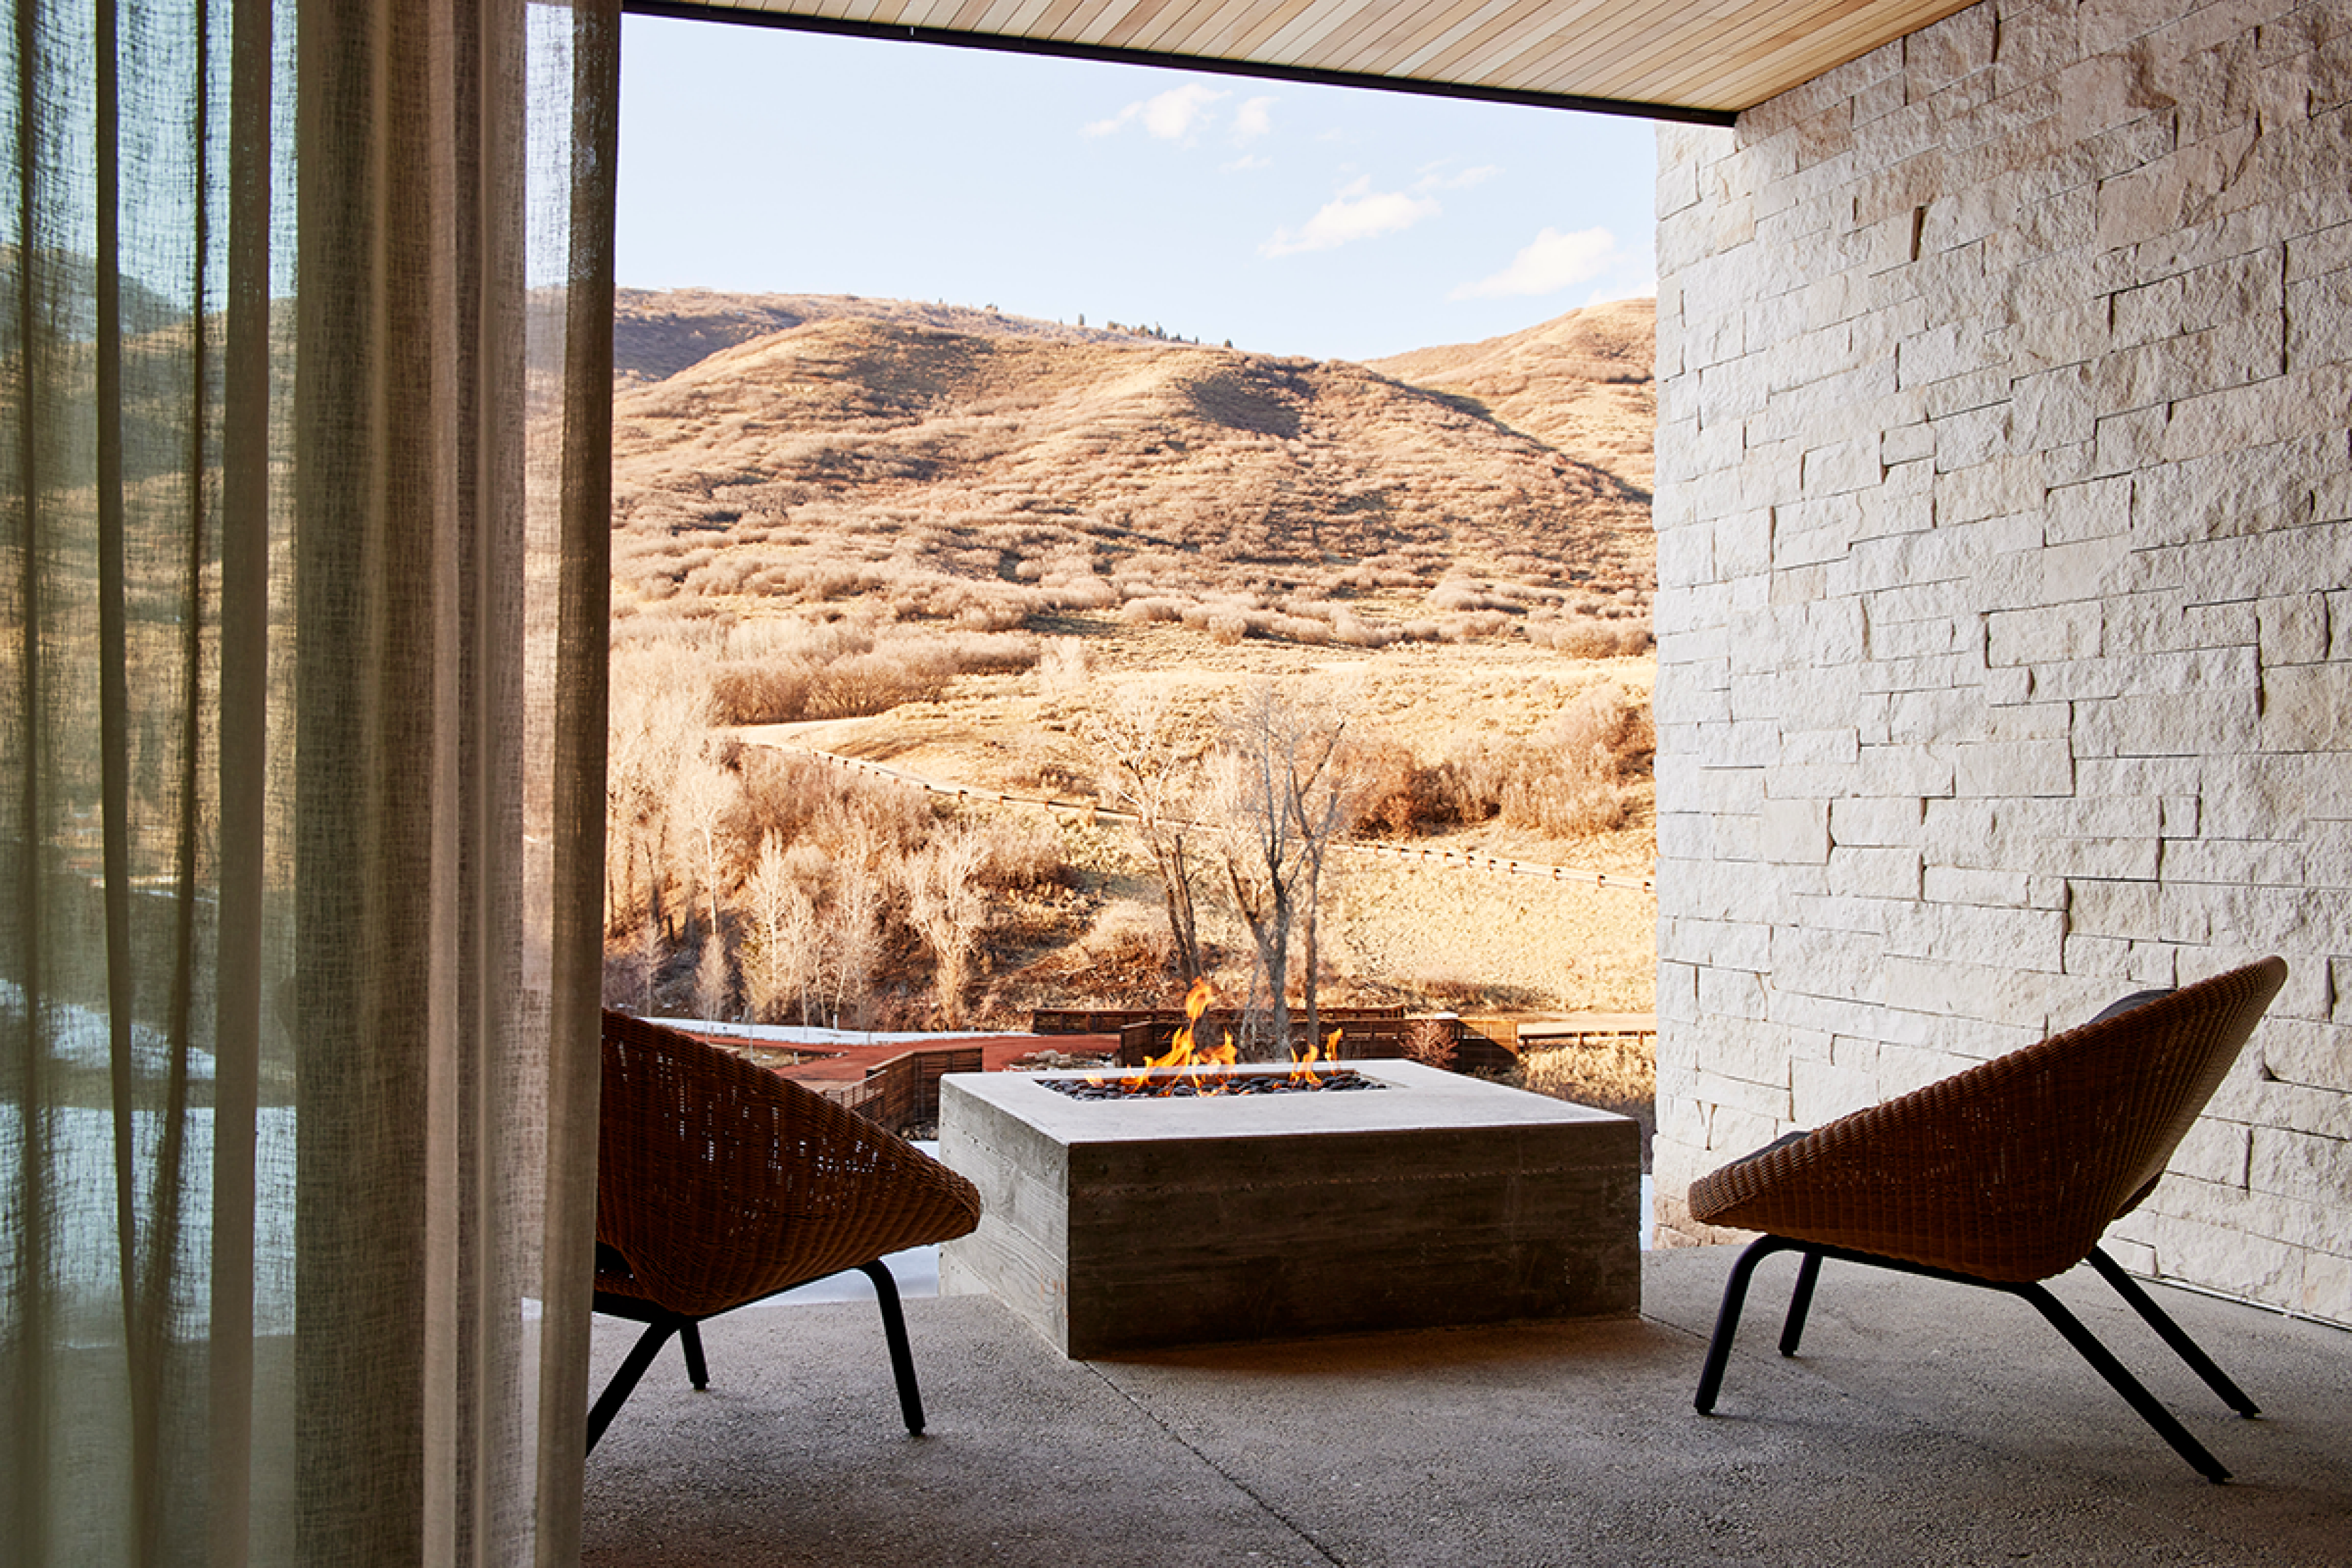 two chairs are on a patio with square stone firepit. Overlooks mountain landscape 